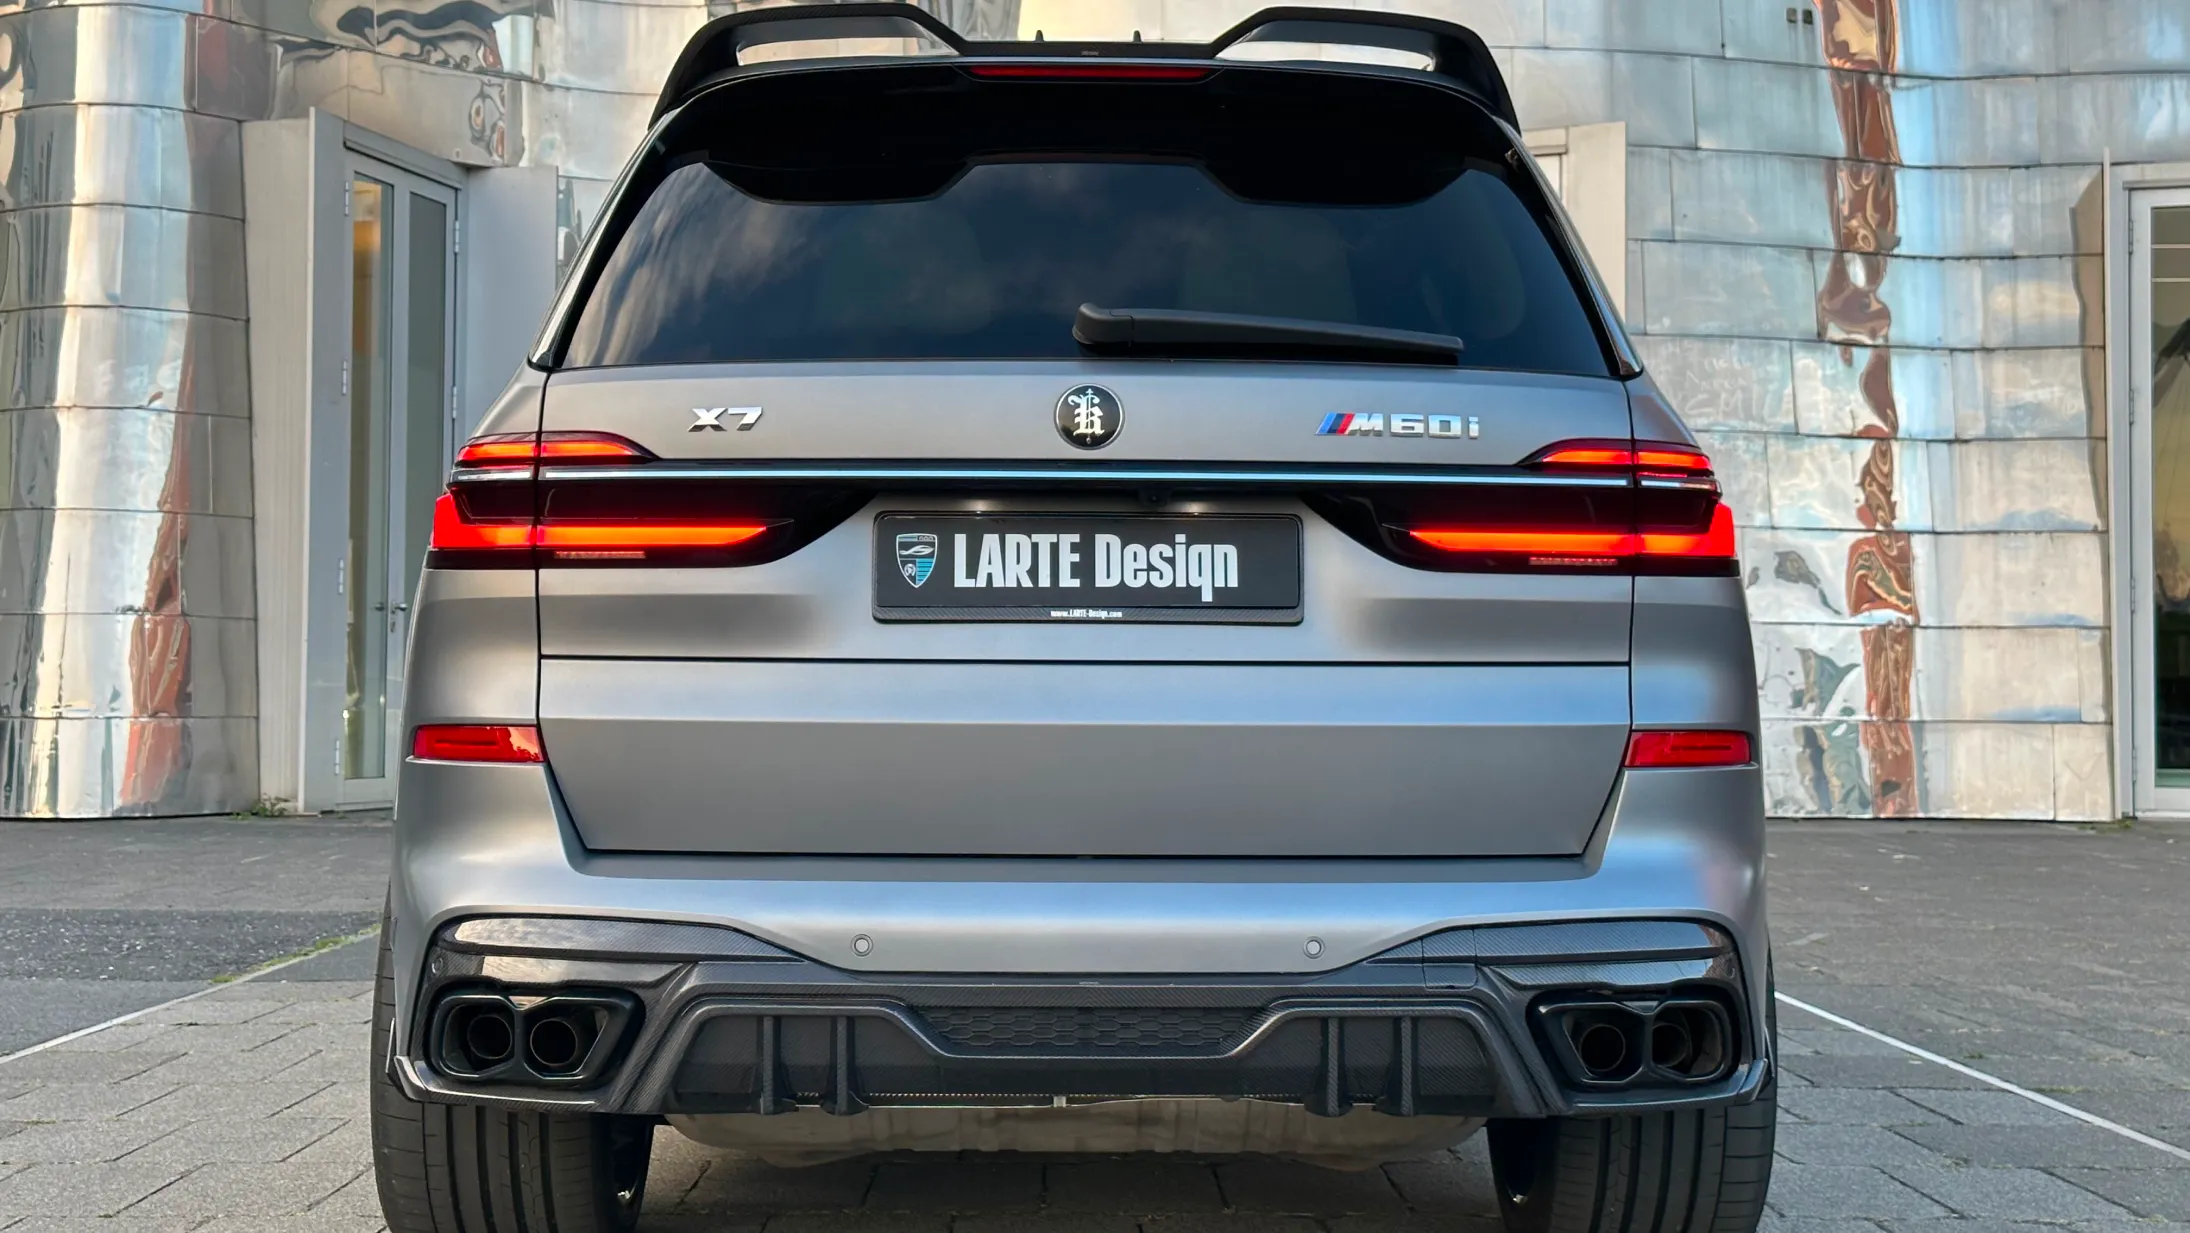 Rear view on a BMW X7 with a body kit giving the car a custom appearance